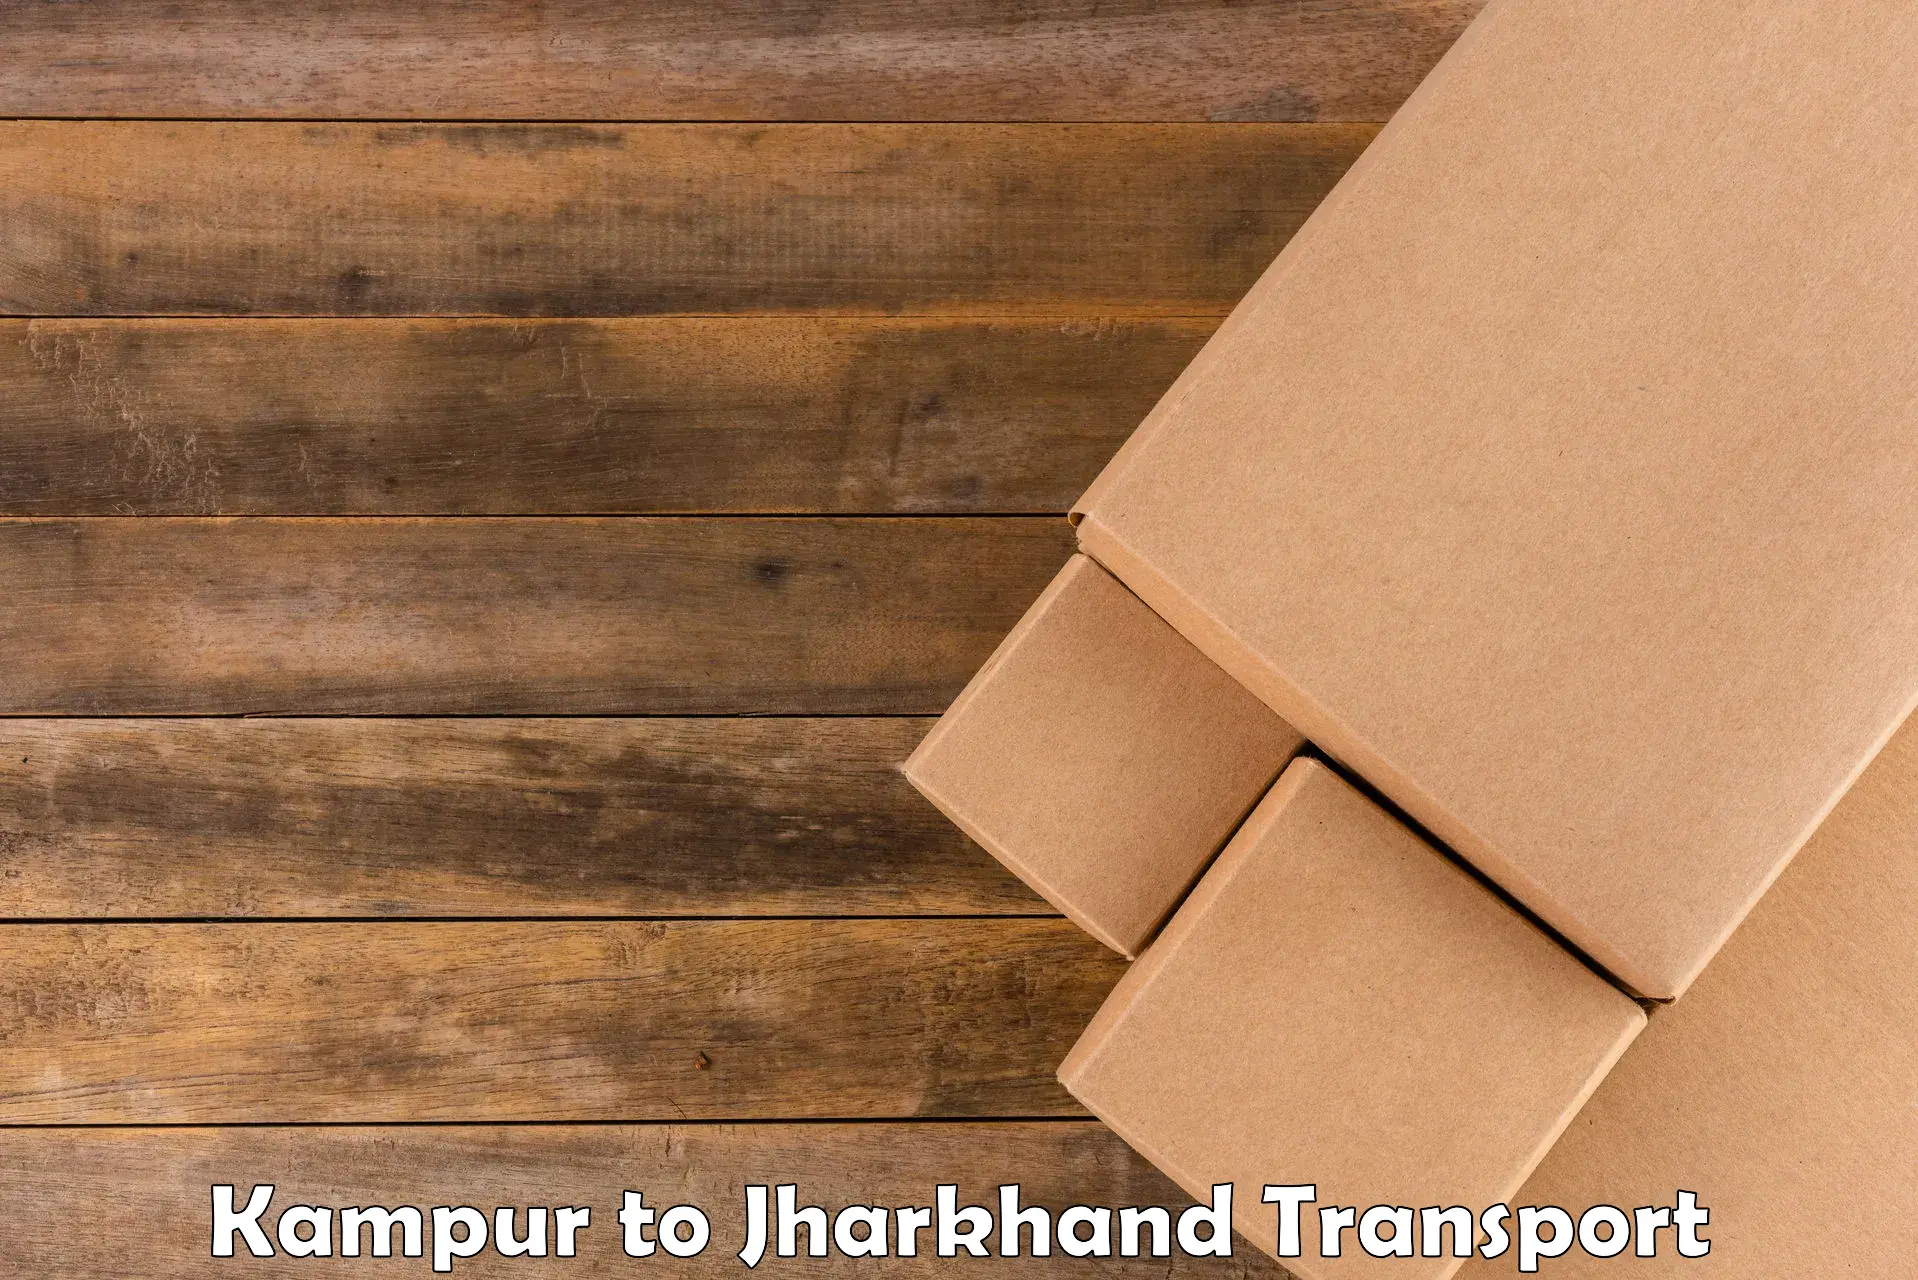 Container transport service Kampur to Ranchi